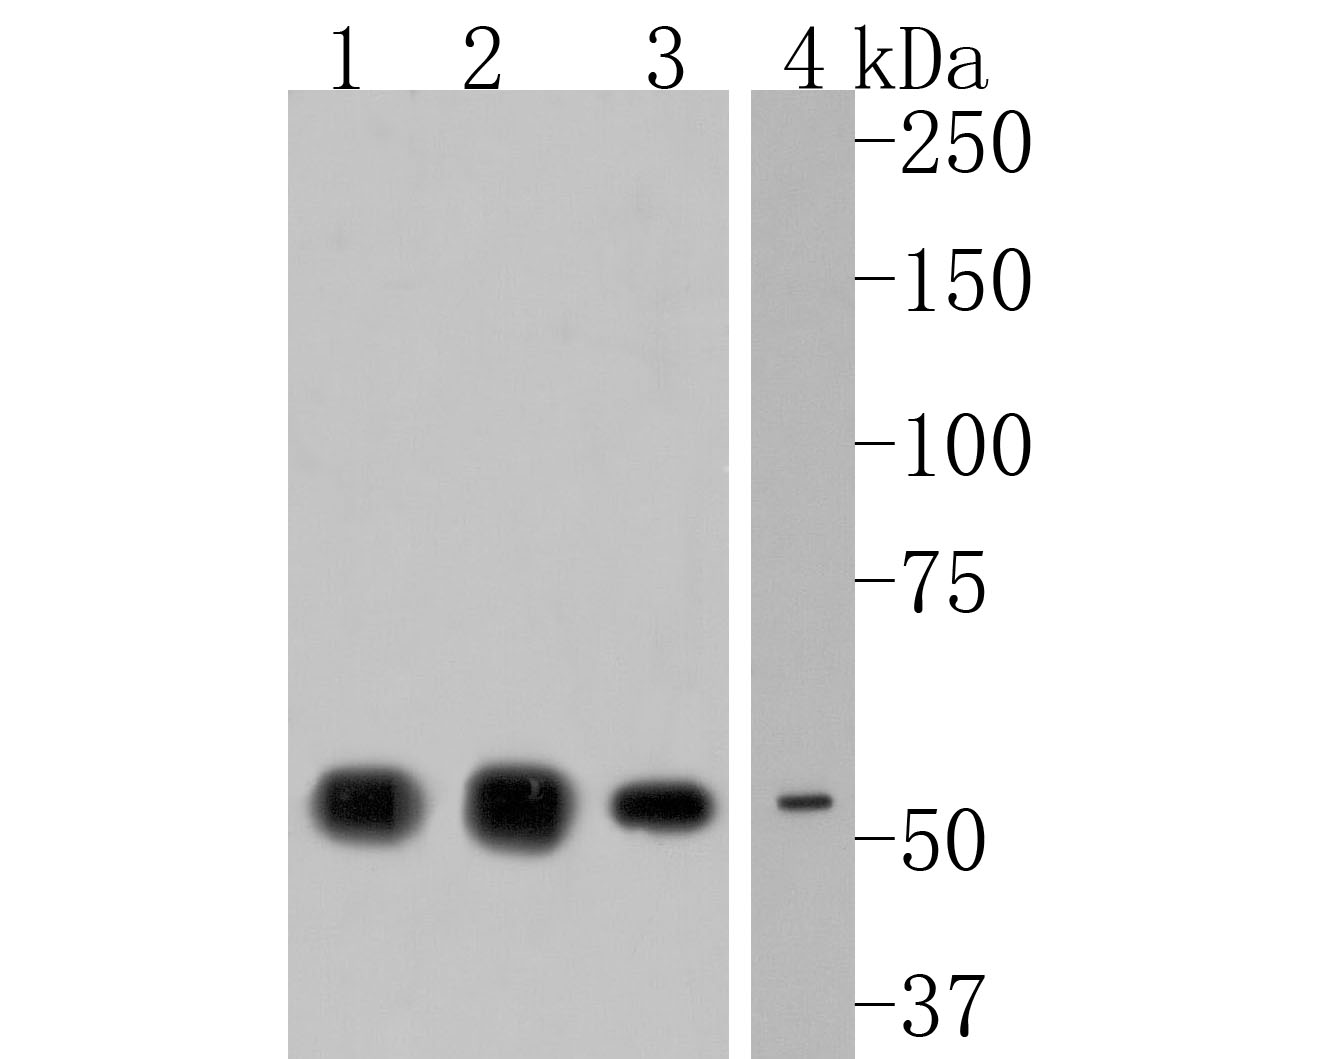 Western blot analysis of NPY5R on different lysates. Proteins were transferred to a PVDF membrane and blocked with 5% NFDM/TBST for 1 hour at room temperature. The primary antibody (HA720061, 1/500) was used in 5% NFDM/TBST at room temperature for 2 hours. Goat Anti-Rabbit IgG - HRP Secondary Antibody (HA1001) at 1:200,000 dilution was used for 1 hour at room temperature.<br />
Positive control: <br />
Lane 1: Human brain tissue lysate<br />
Lane 2: Rat brain tissue lysate<br />
Lane 3: A549 cell lysate<br />
Lane 4: Mouse spleen tissue lysate